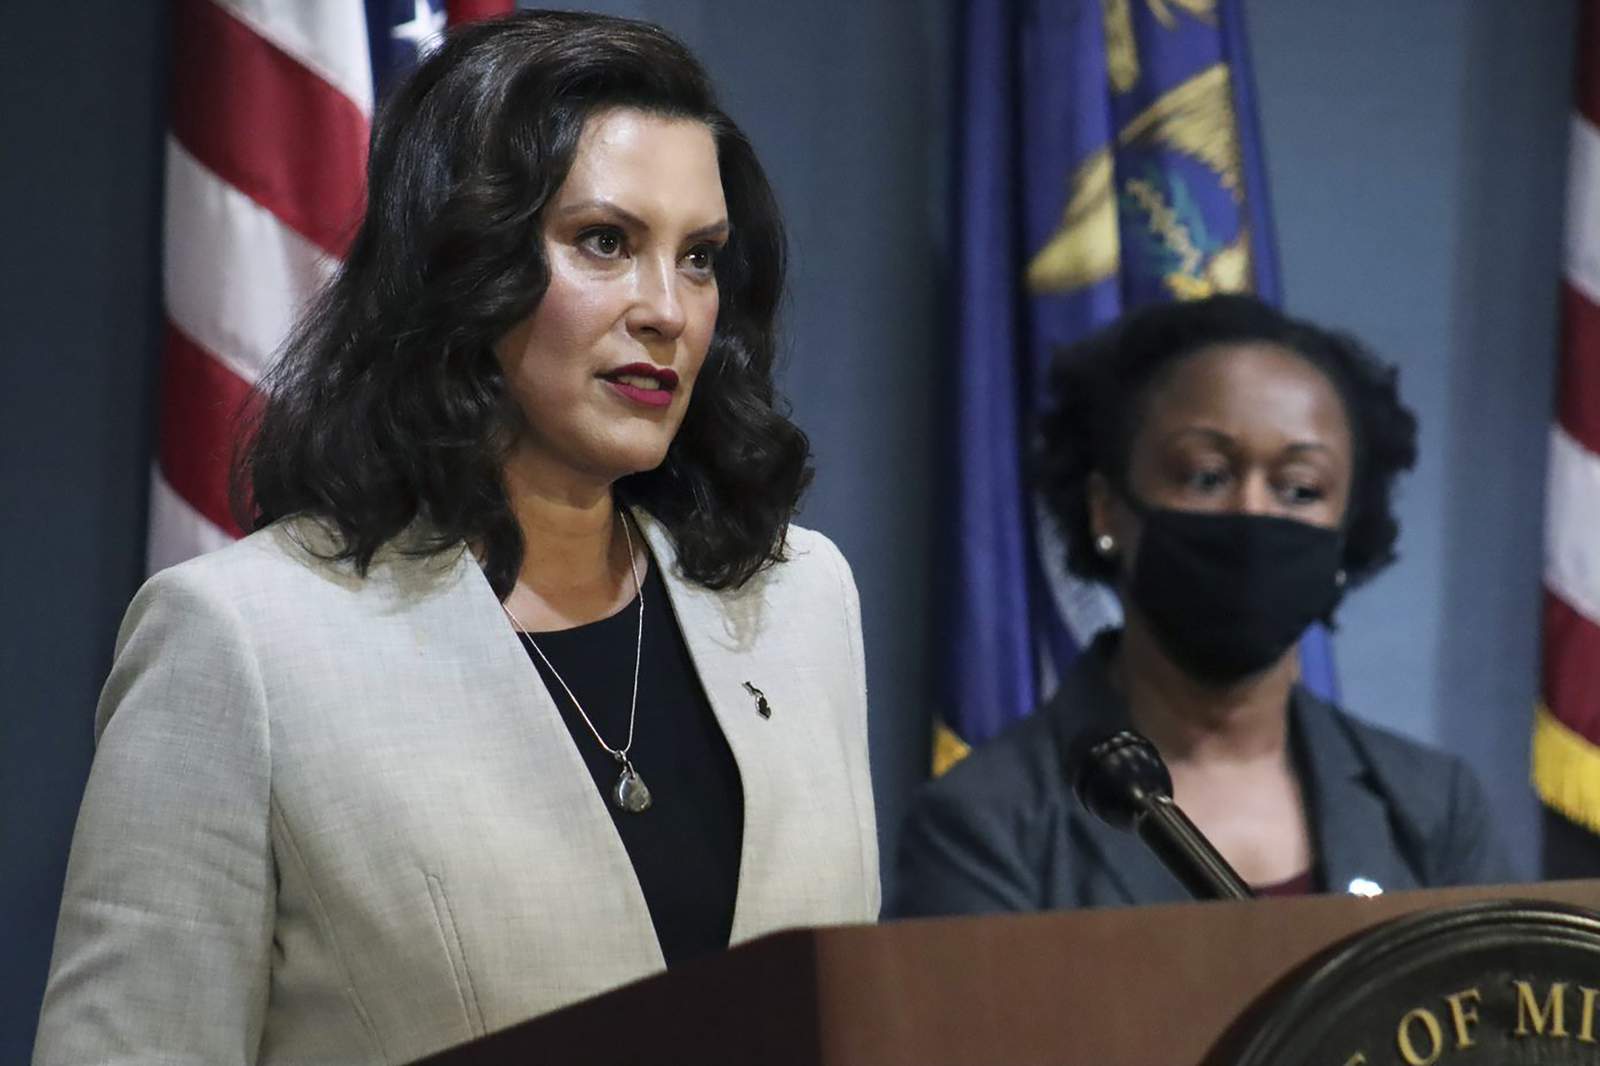 Gov. Gretchen Whitmer appeals ruling that would allow Michigan gyms to reopen this week